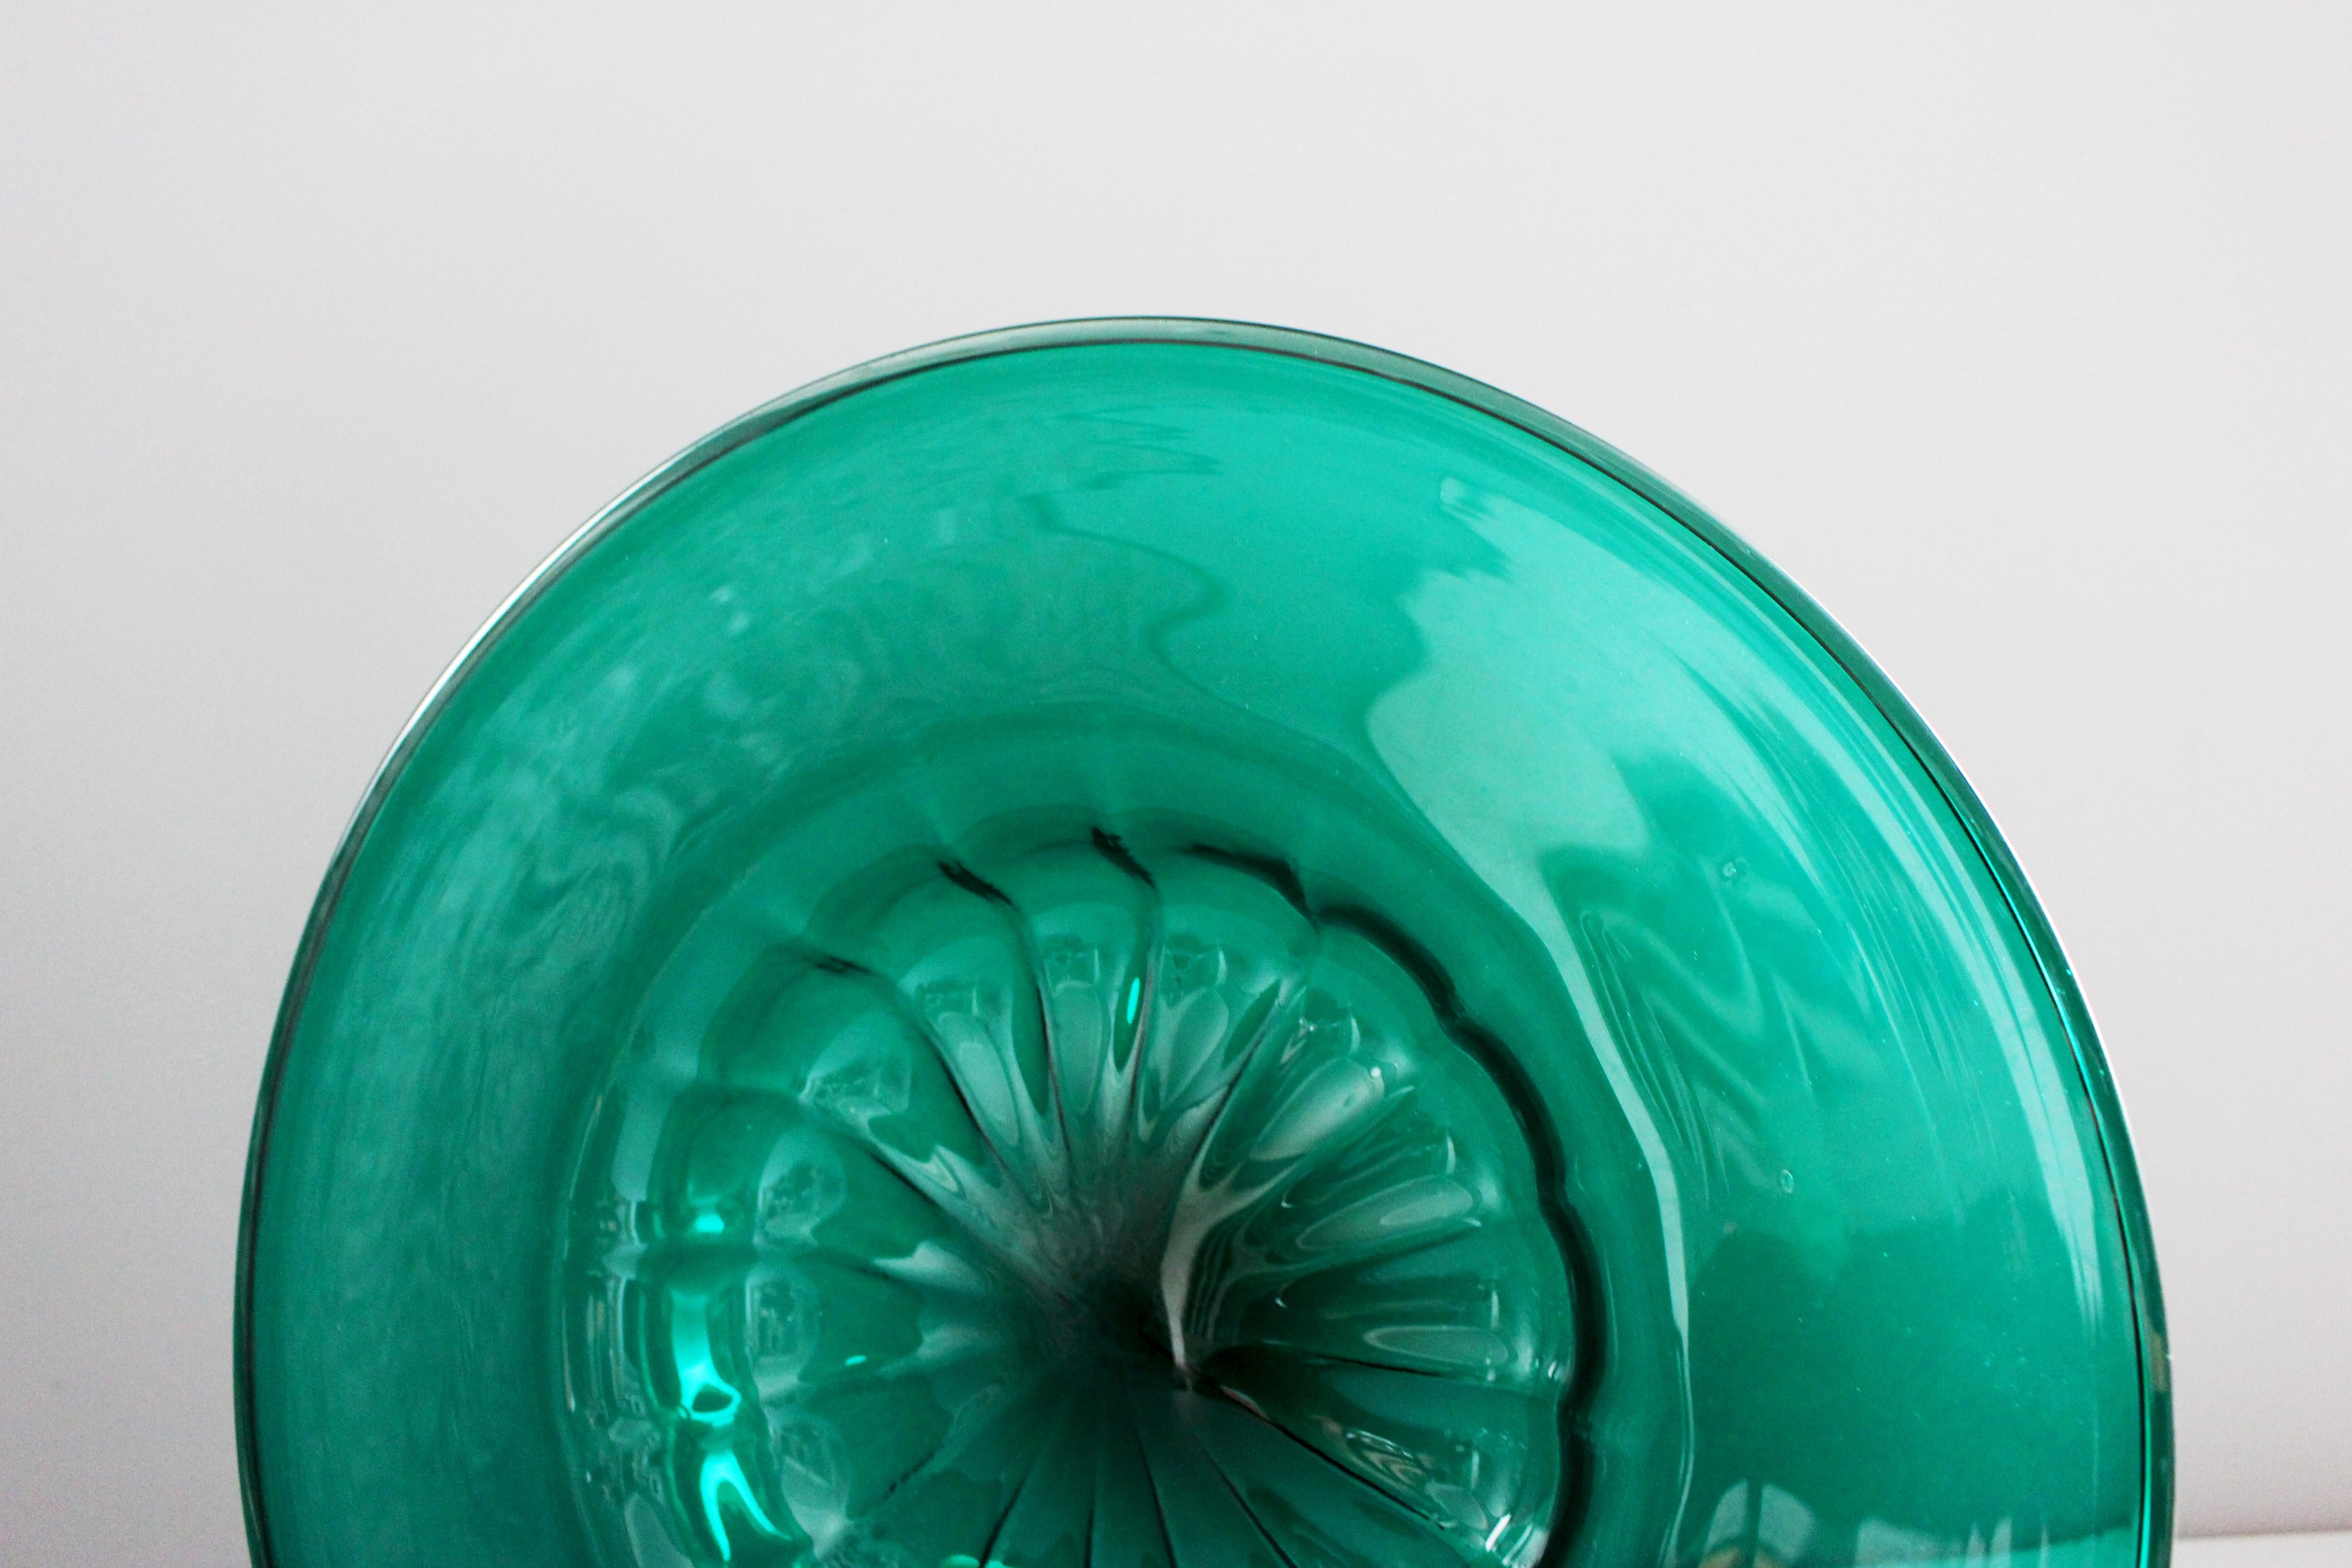 A Mid-Century Murano glass platter by Venini, circa 1960, emerald green, circular form with central well and broad rim, underneath acid etched Venini Murano Italia.